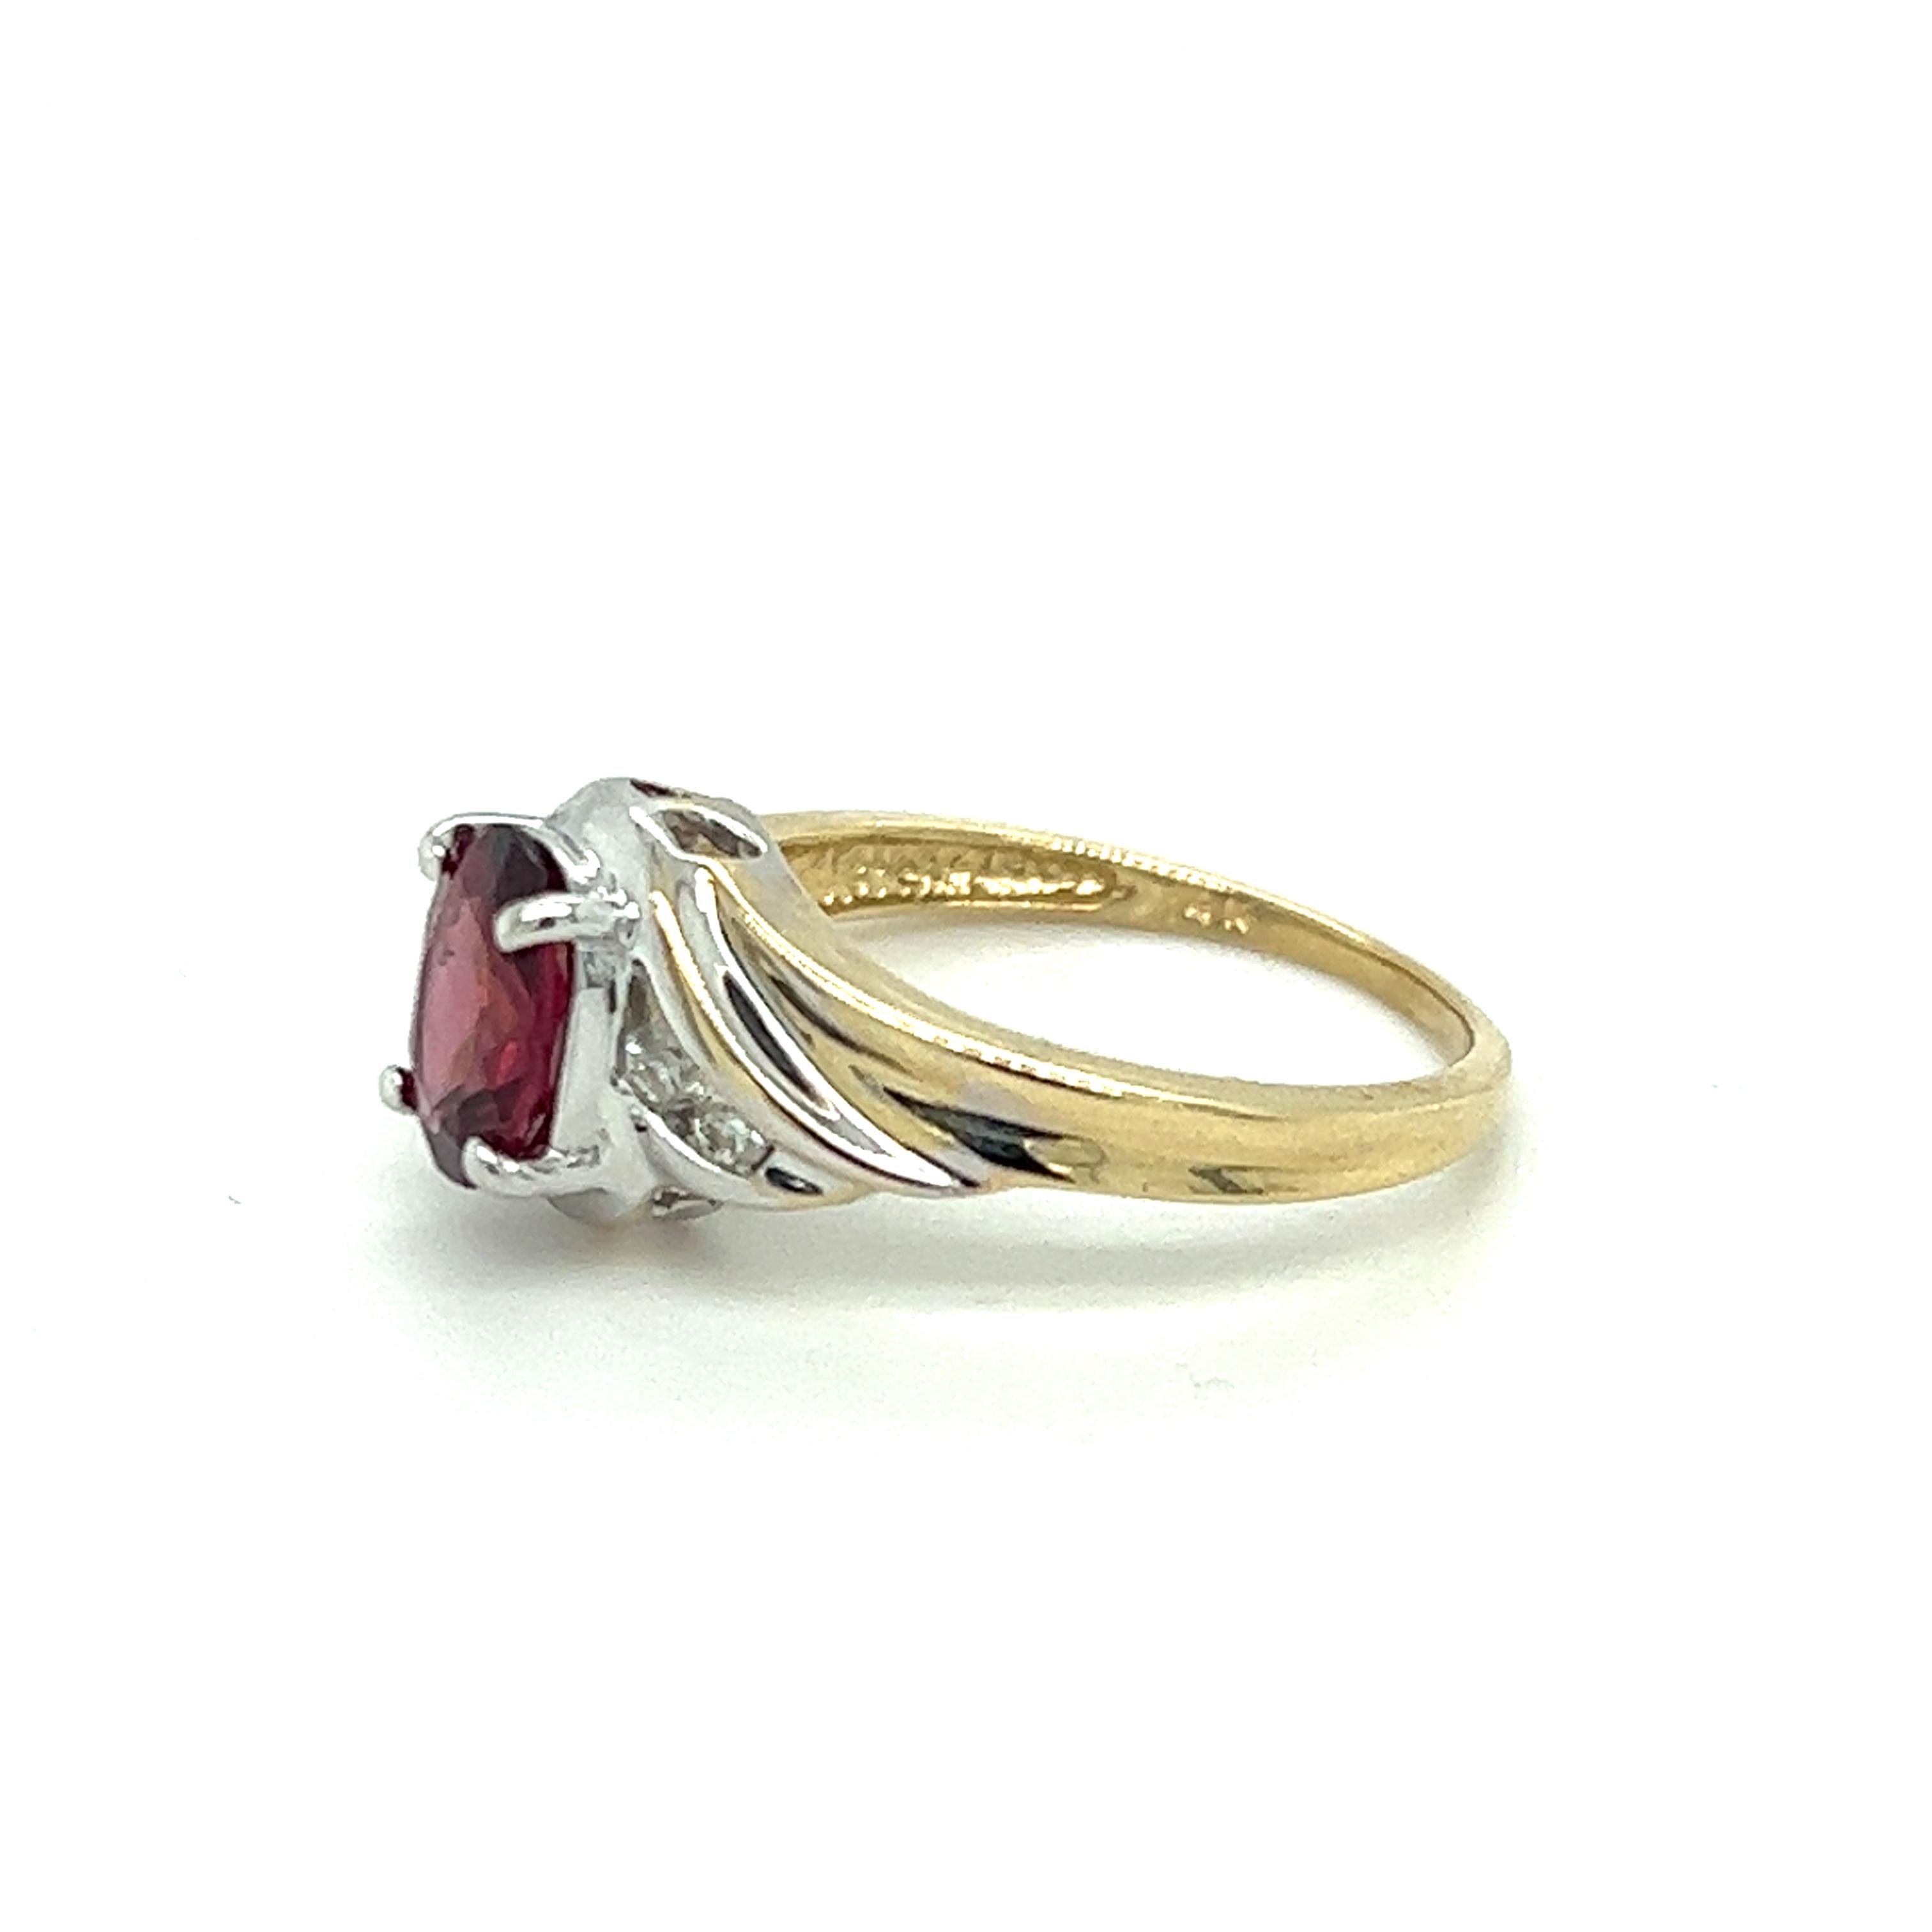 One 14 karat yellow and white gold ring set with one 8x6mm oval rhodolite garnet and 4 brilliant cut diamonds, approximately  0.12 carat total weight with matching I/J color and I1 diamonds.  The ring is a finger size 7.75 and can be resized. Sizing